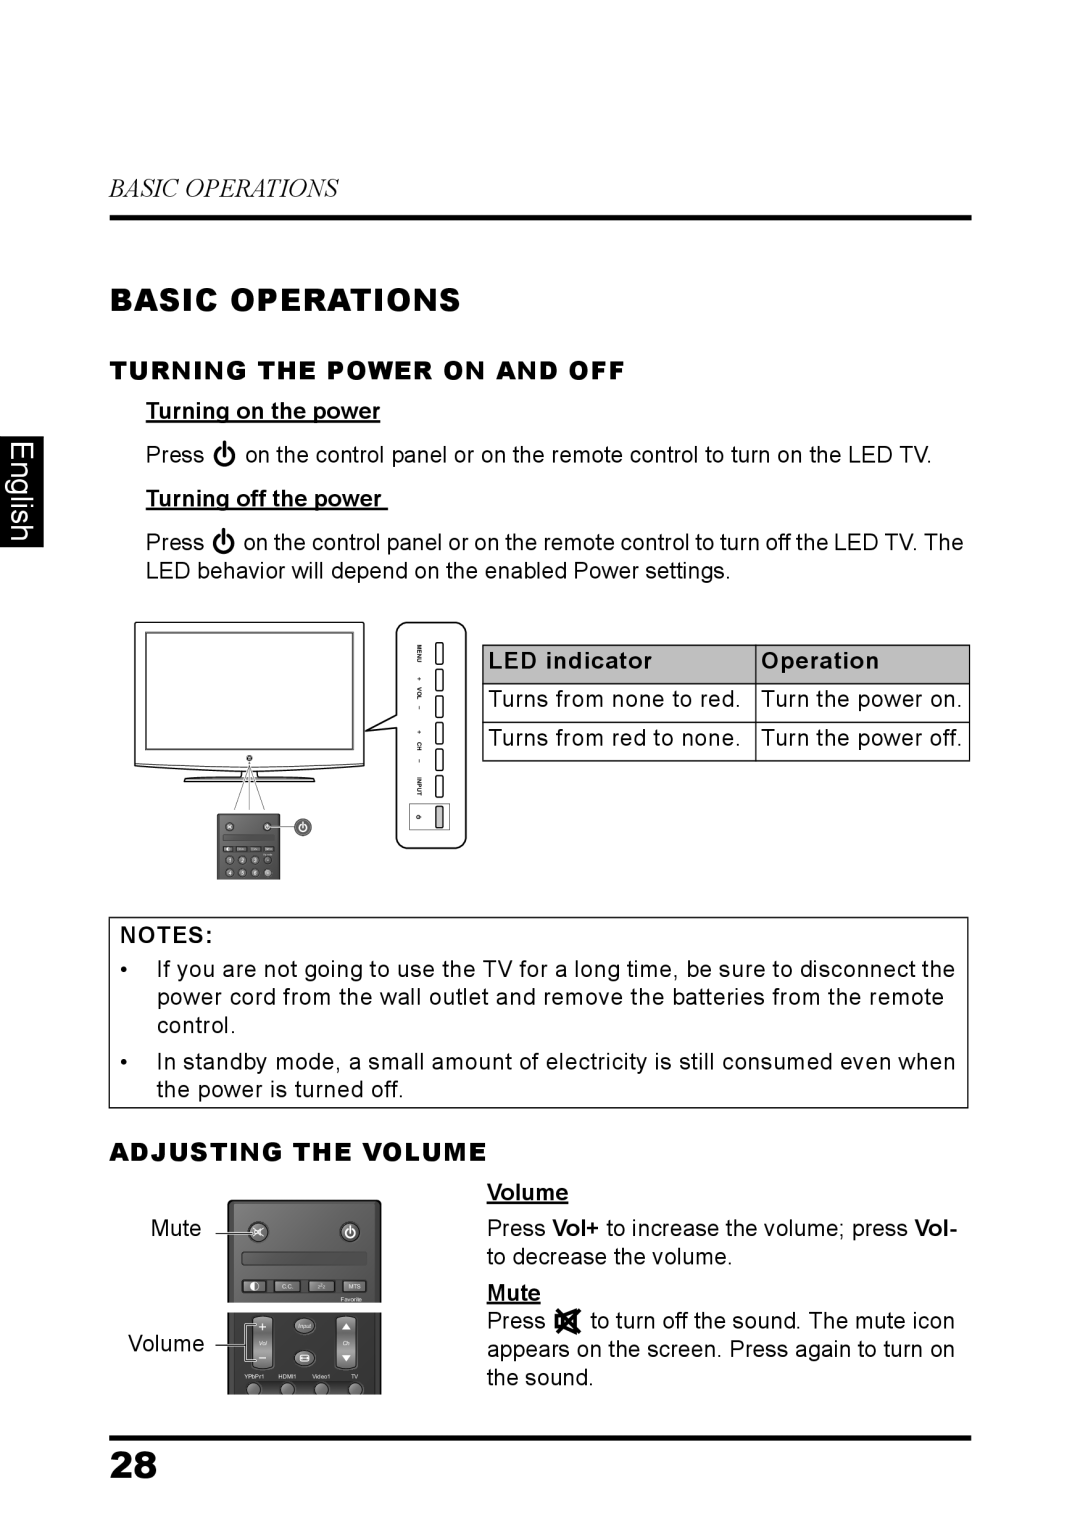 Westinghouse LD-3237 user manual Basic Operations, English, Turning The Power On And Off, Adjusting The Volume 